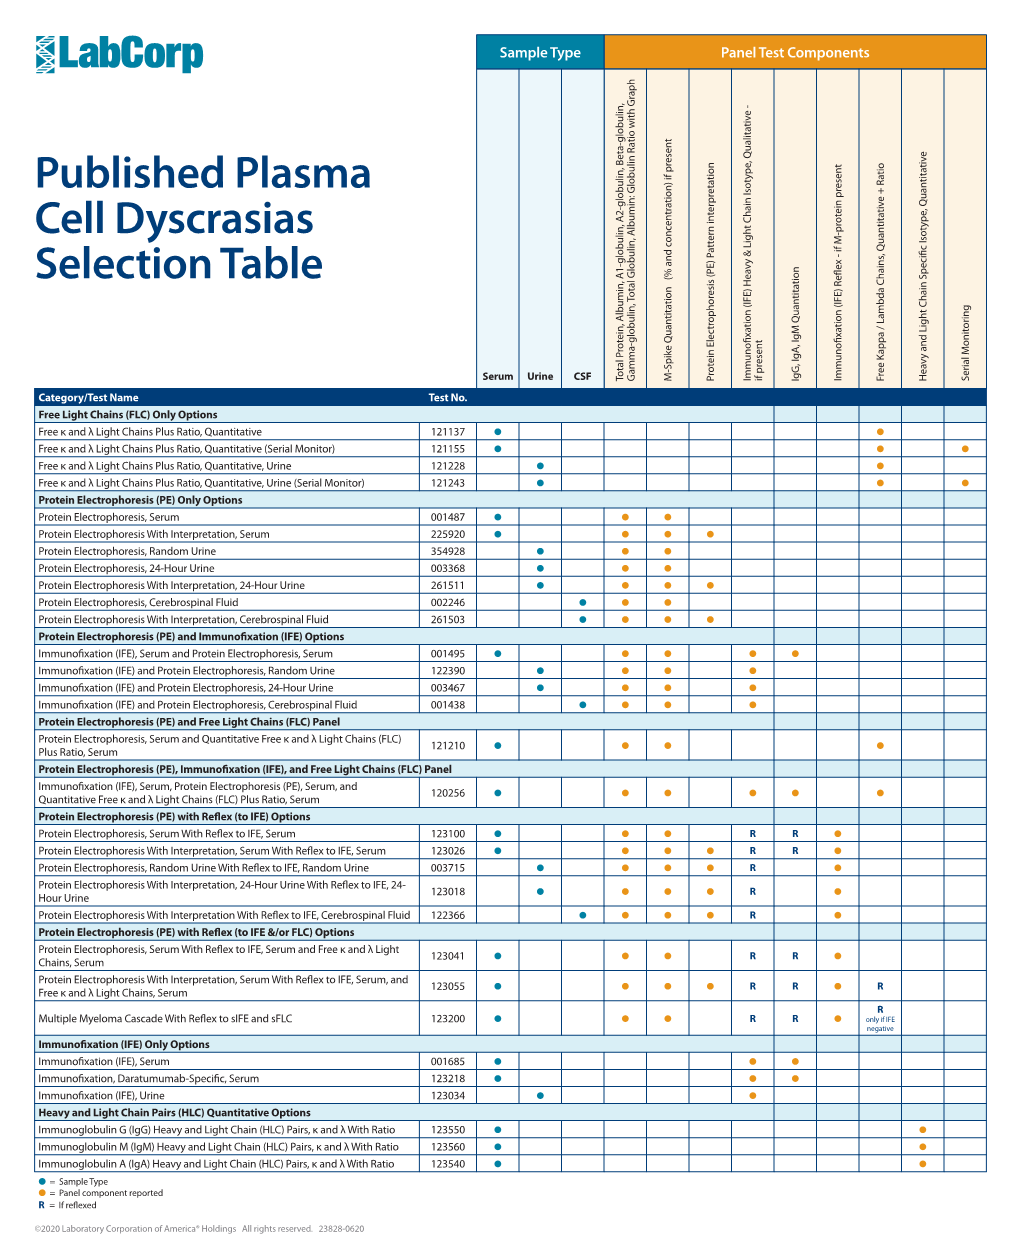 Published Plasma Cell Dyscrasias Selection Table